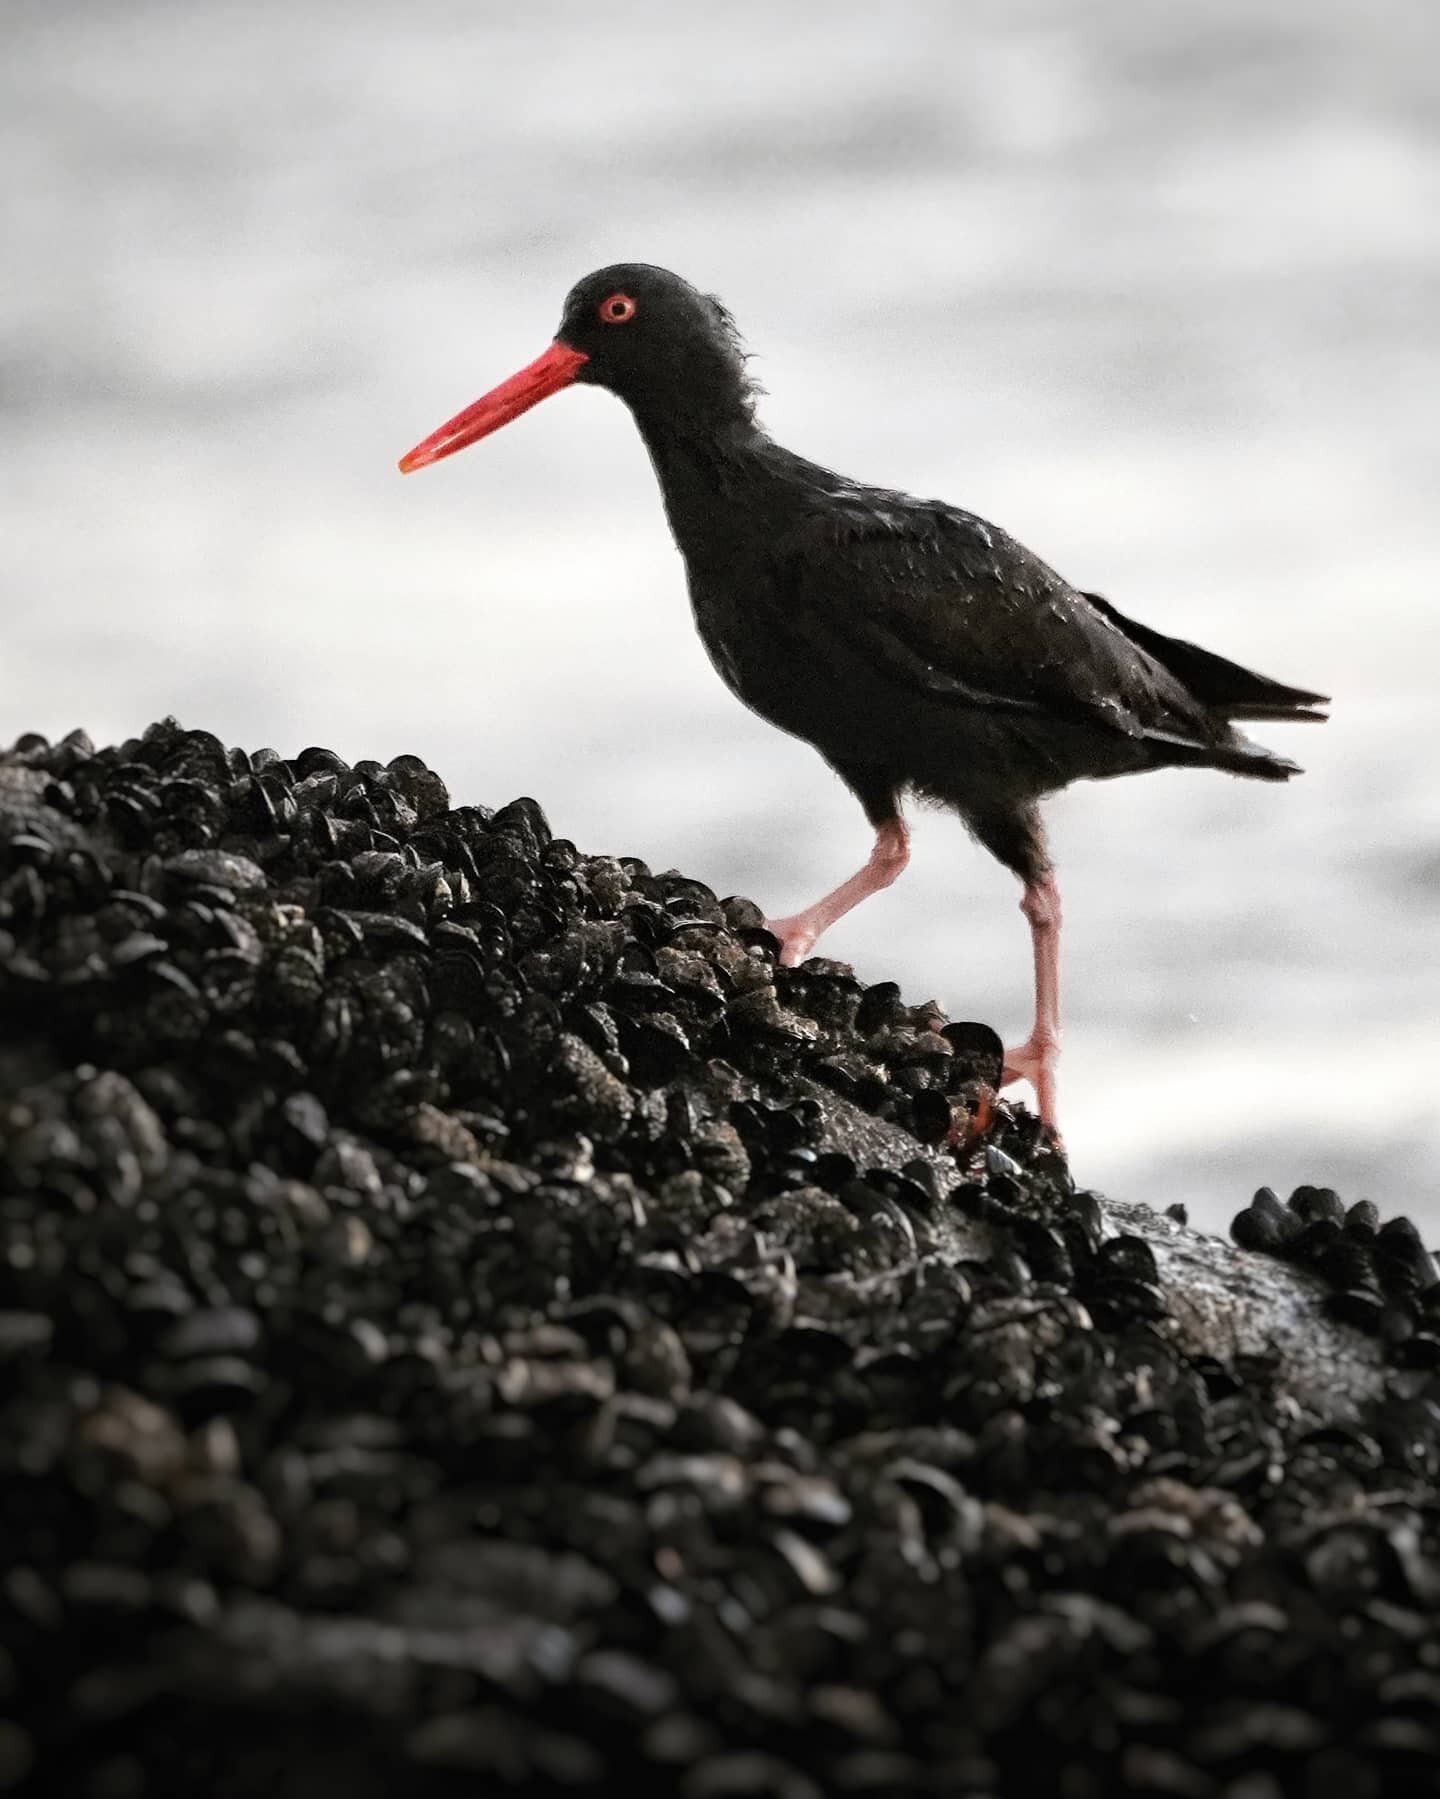 #💪 Oystercatcher showing off his mussels. While it is difficult to distinguish between male and female oystercatchers from just their appearances, one tiny feature can provide a clue&mdash;a black fleck on the iris of their eyes. For the most part, 